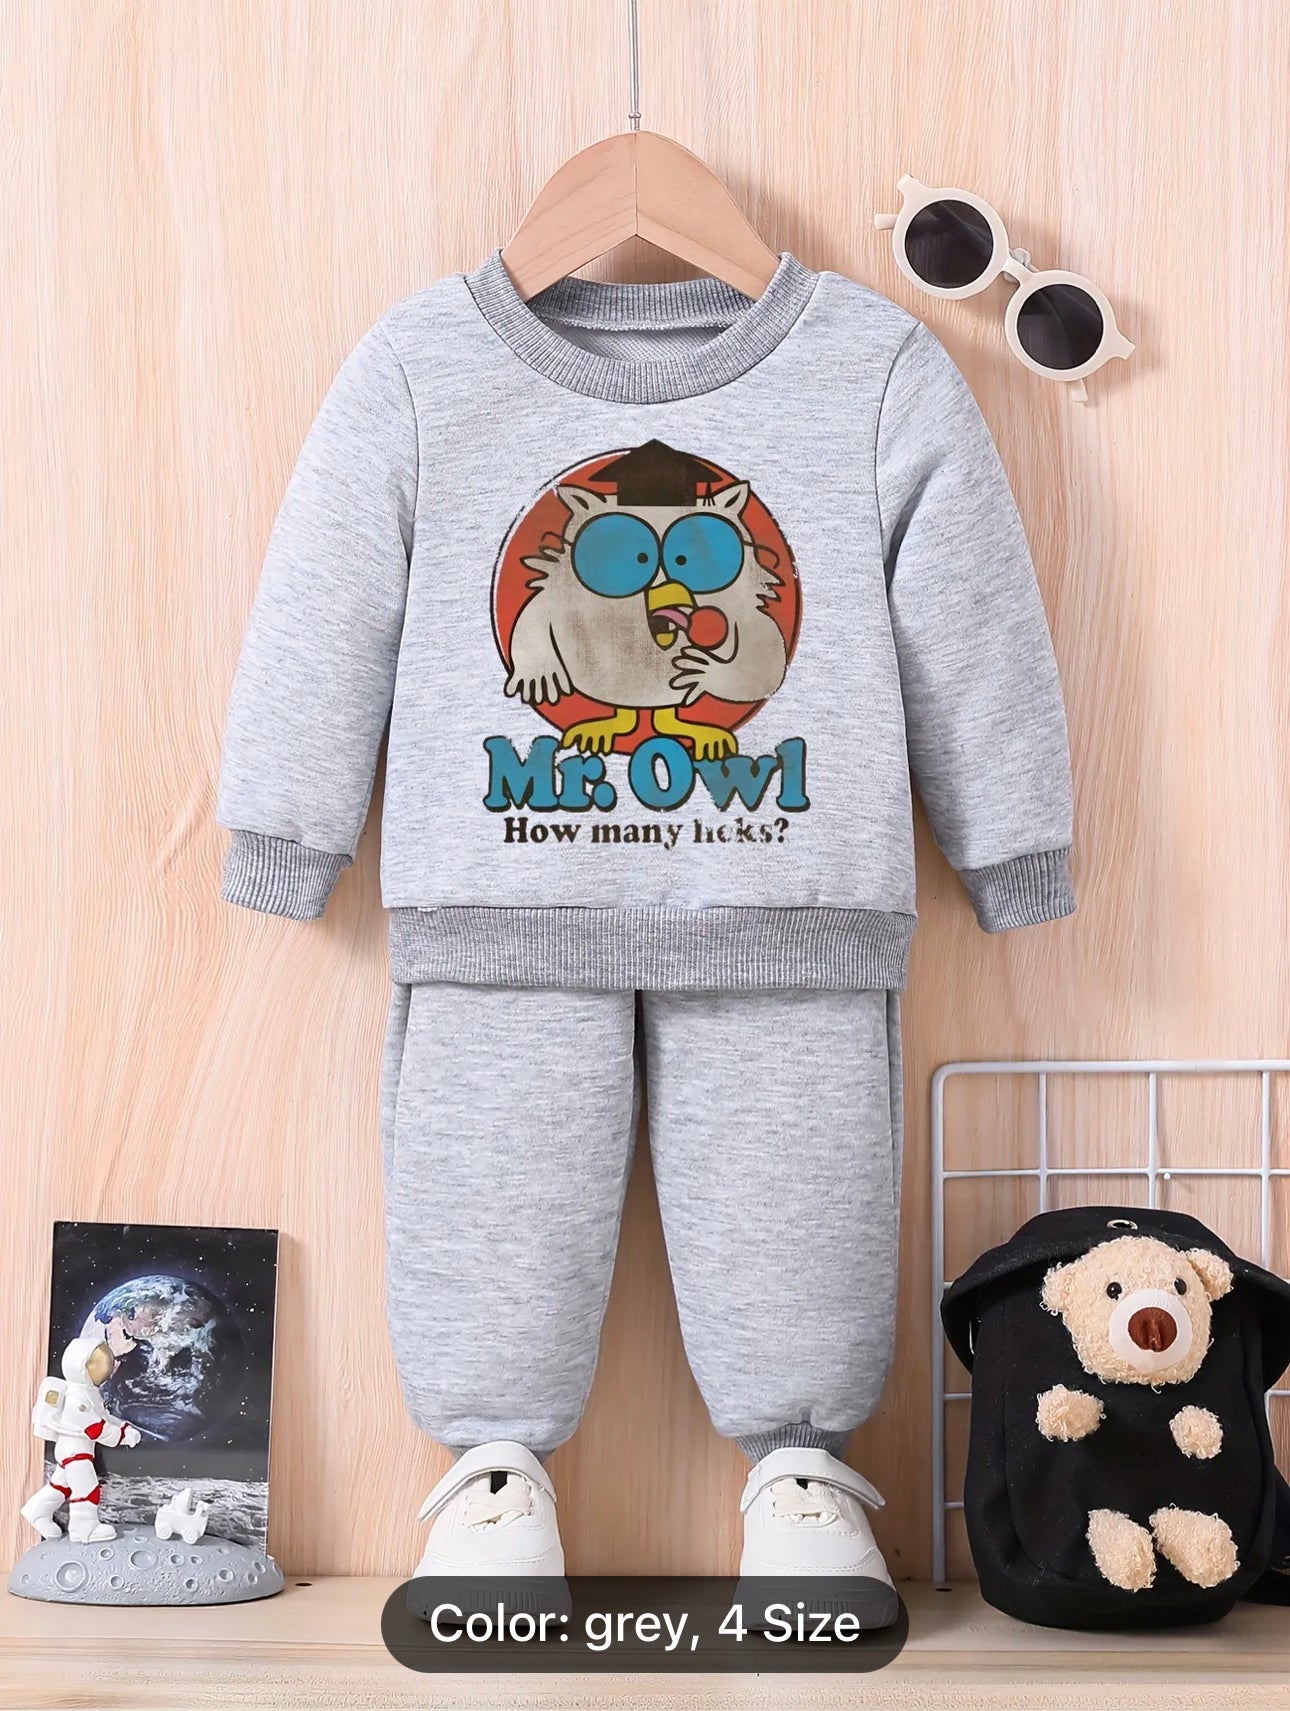 Kids Mr. Owl Cartoon Print Round Neck Sweatshirt And Pants, Fashion Suit For Spring And Autumn